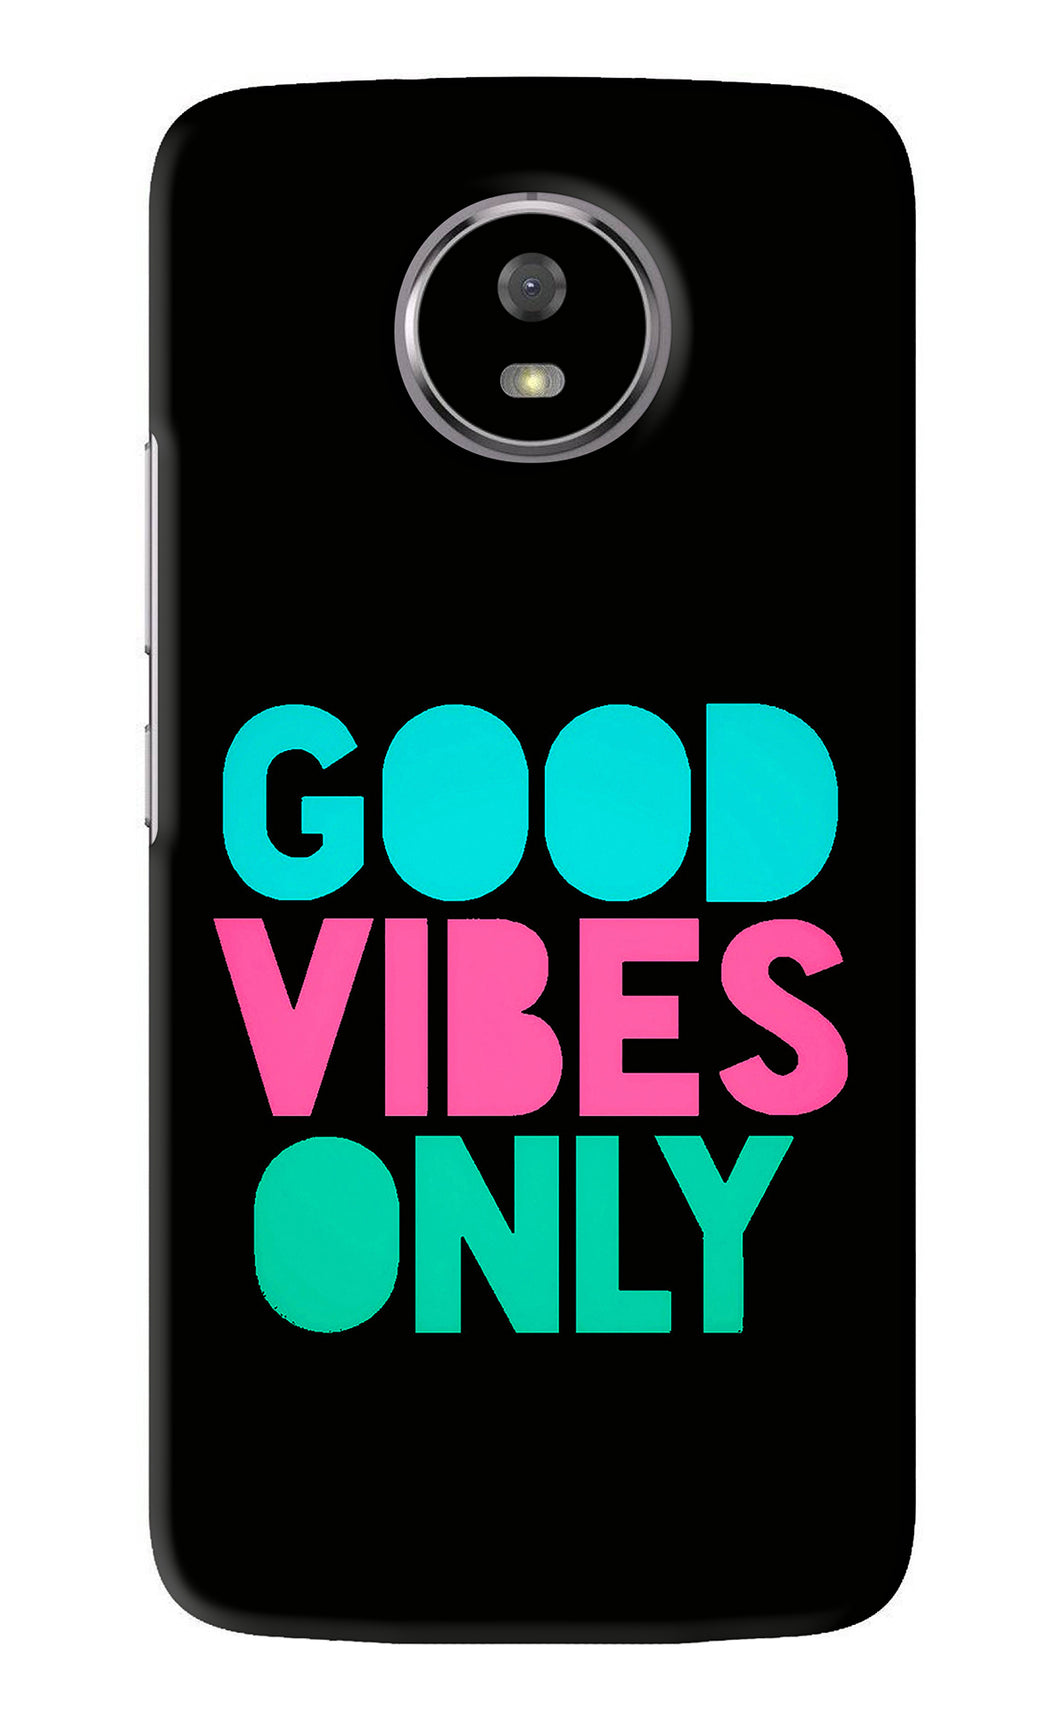 Quote Good Vibes Only Motorola Moto G5S Back Skin Wrap